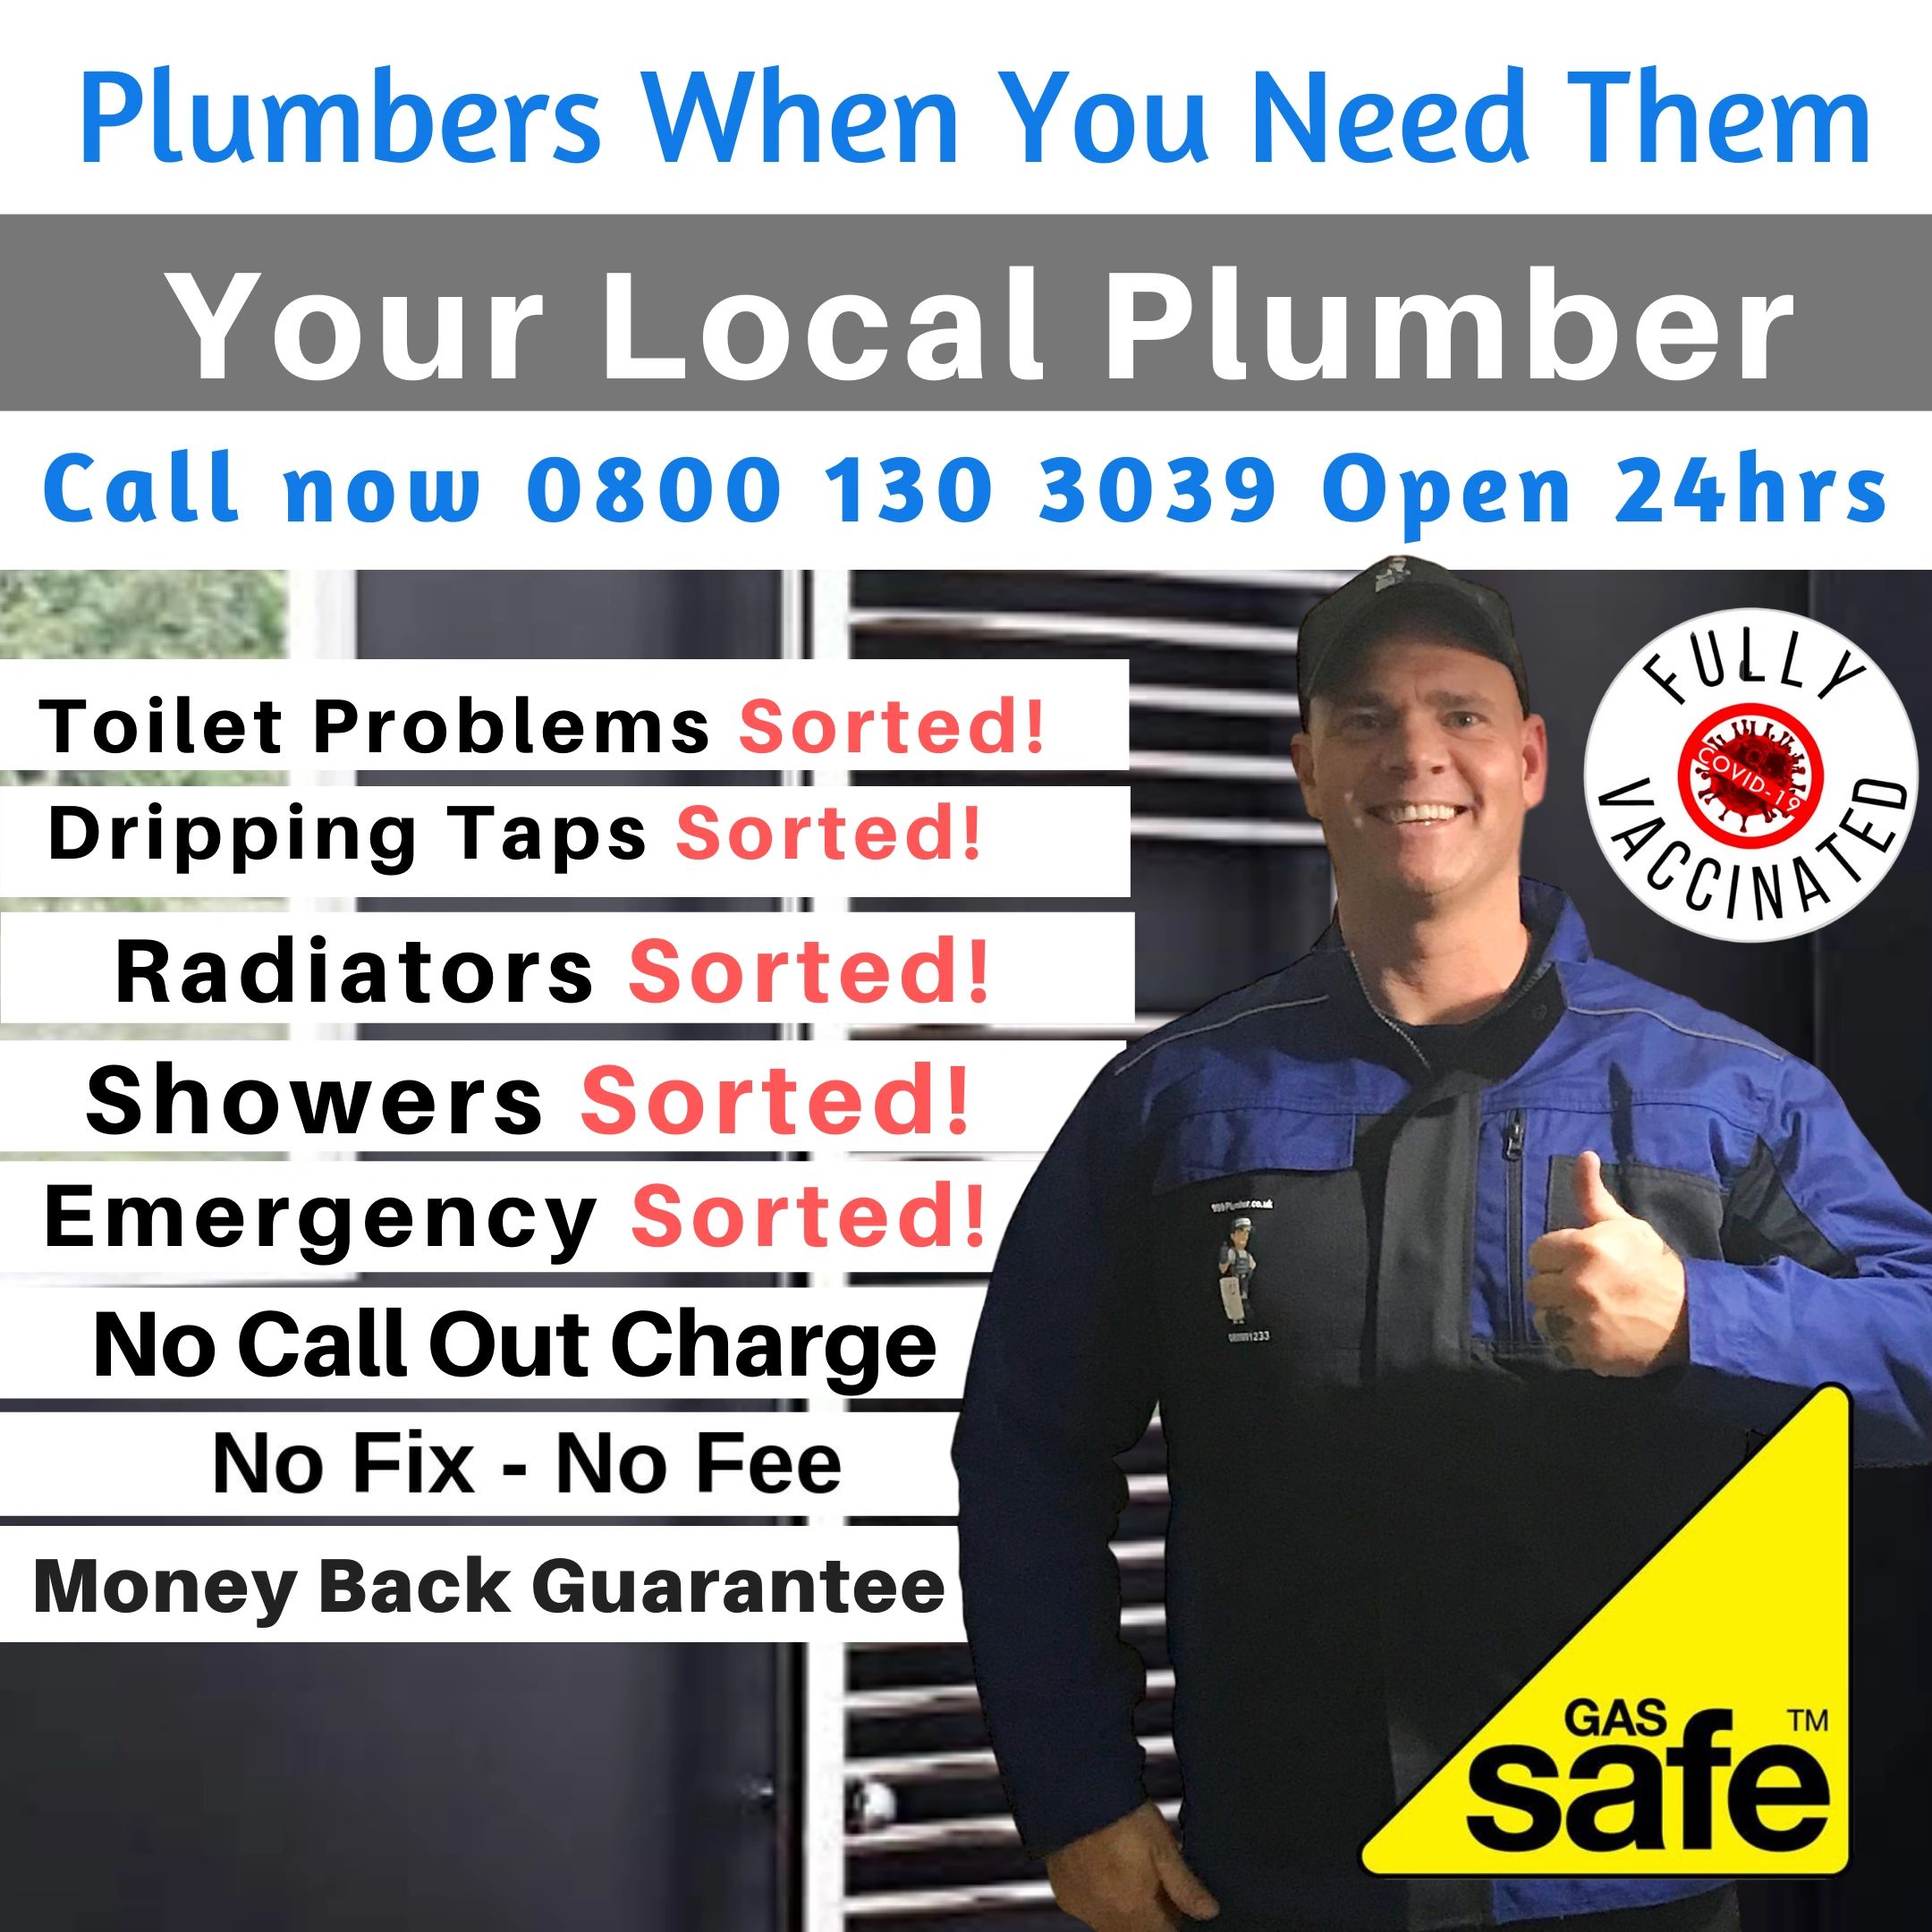 (c) Your-local-plumber.co.uk